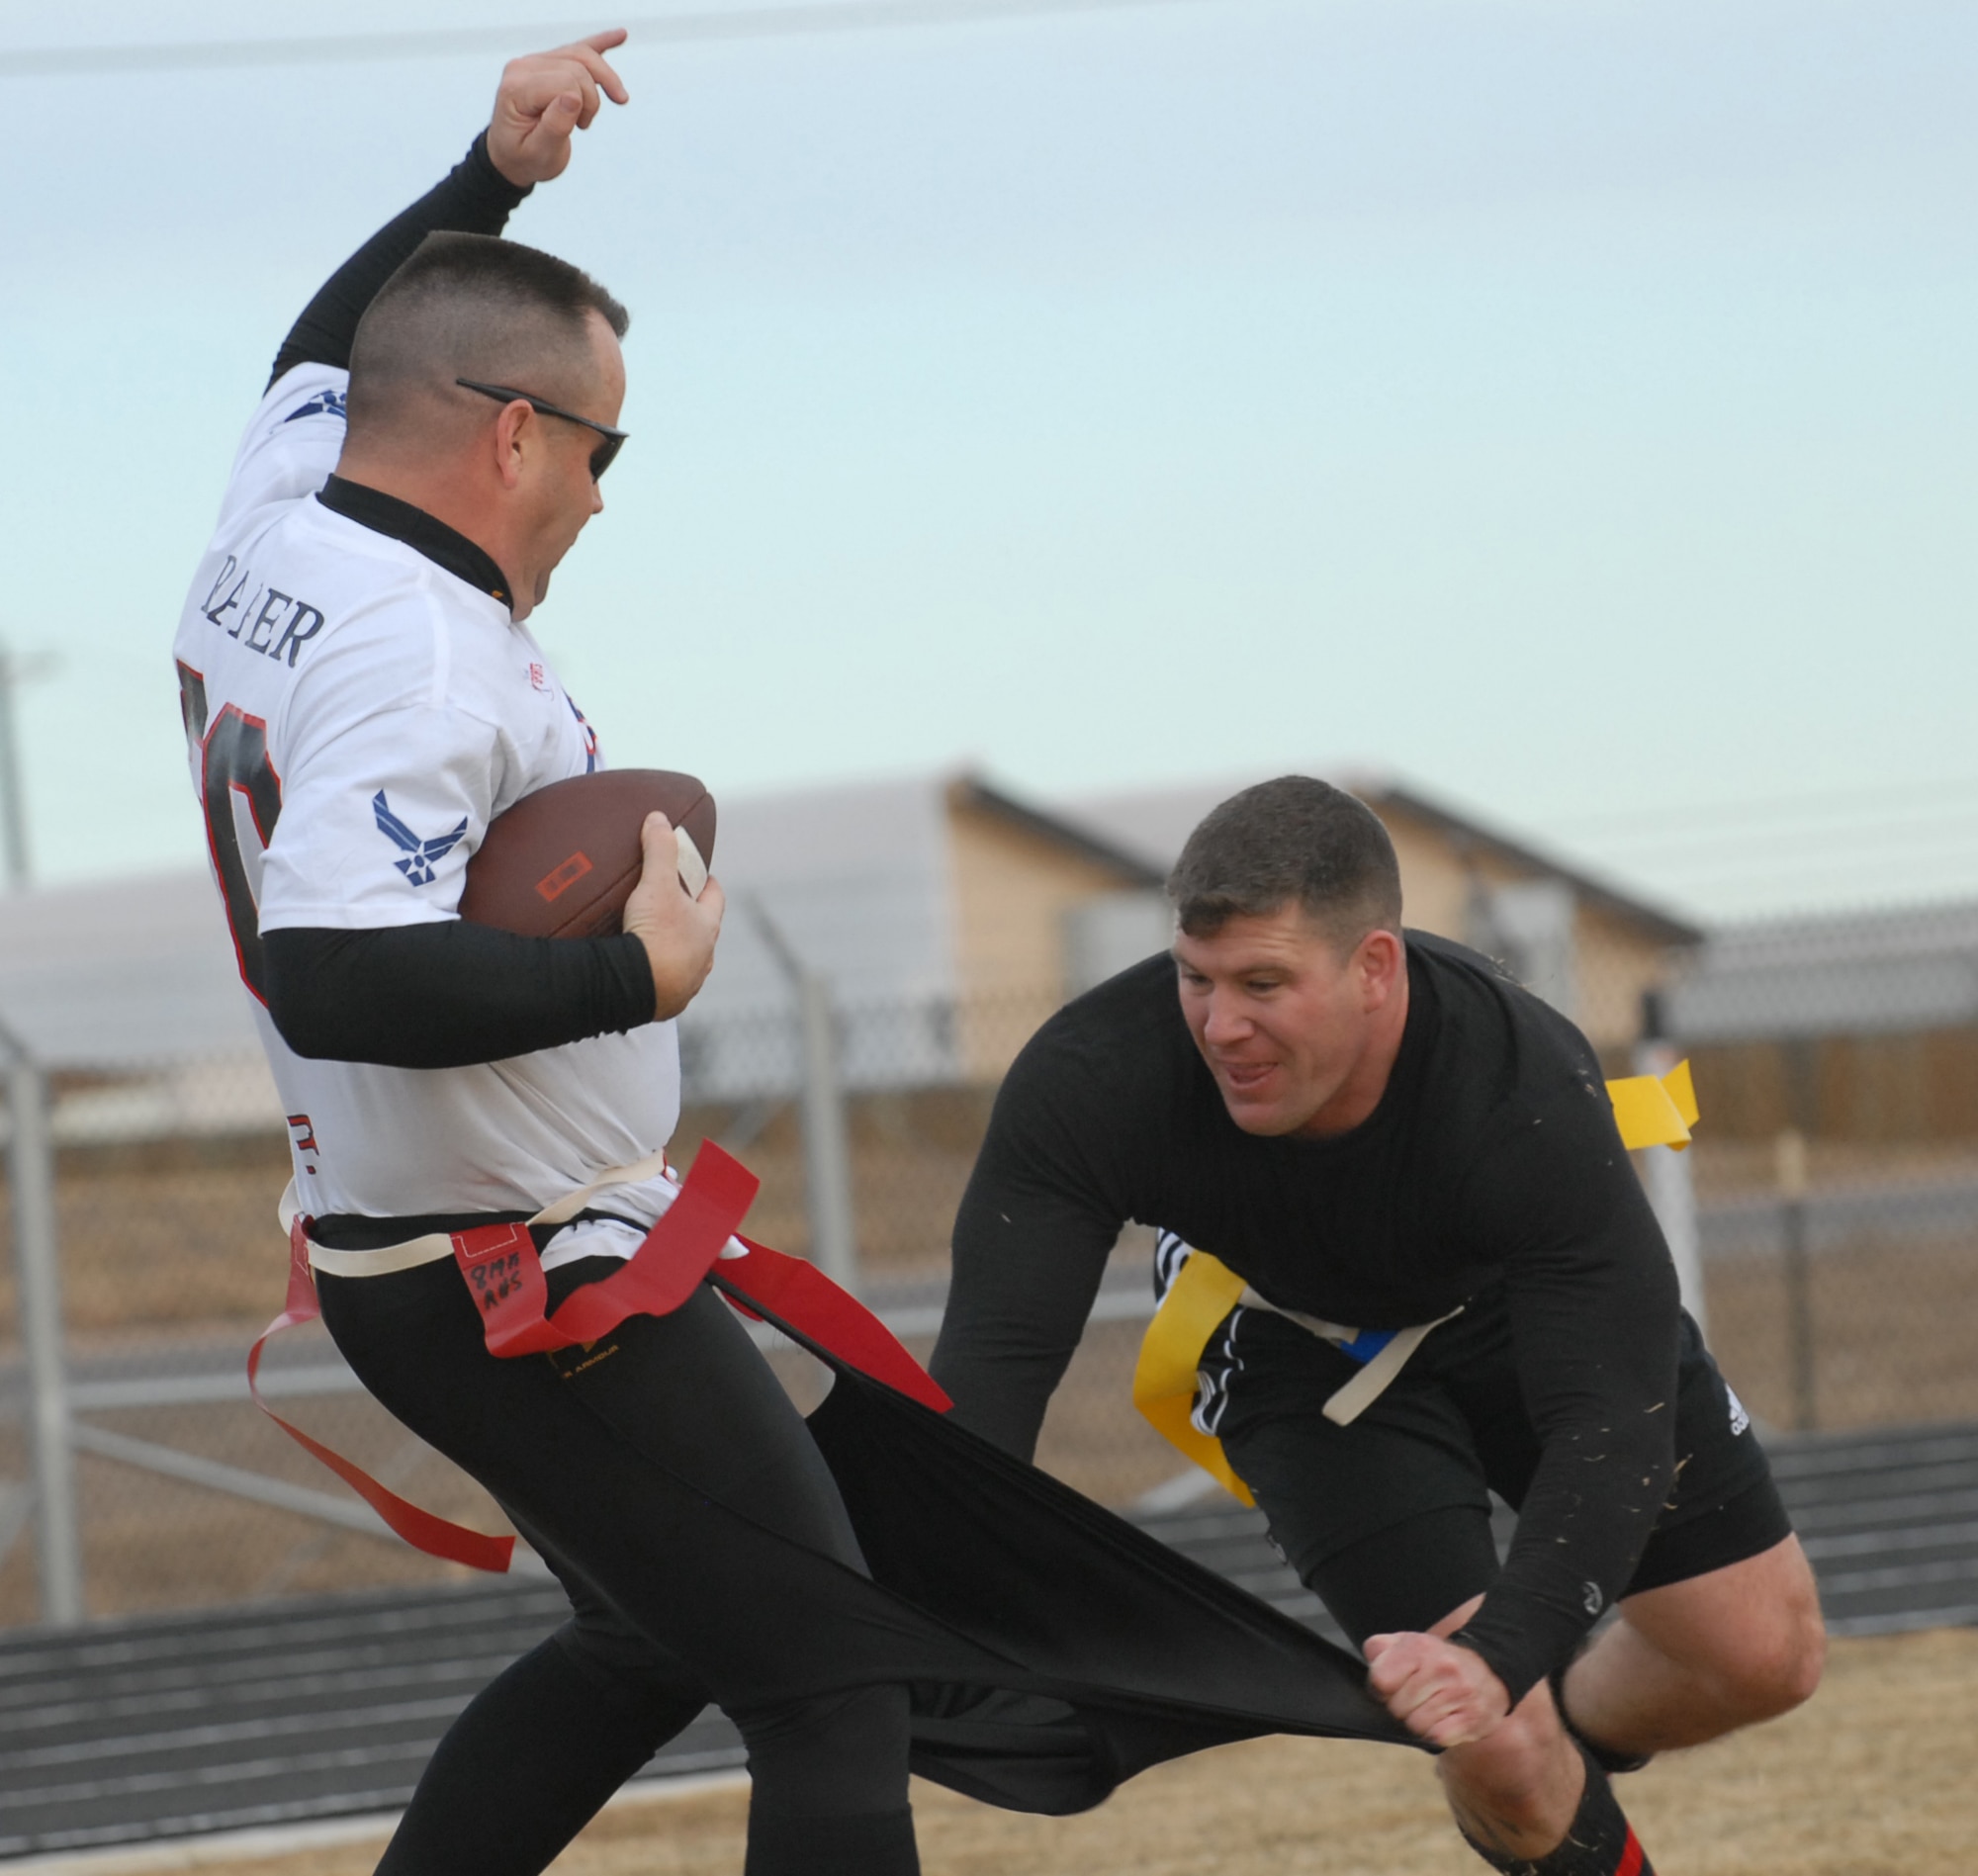 Eagles/Commanders team member Jeff Beckford rips Chiefs/Shirts Randall Raper's shorts off during a flag football game Dec. 14 that was put on to raise canned goods for Operation Warmheart and give base enlisted and officer leadership a chance for friendly competition. The Chiefs/Shirts shut the Eagles/Commanders out 31-0. (U.S. Air Force photo by Airman 1st Class Alex Gochnour)